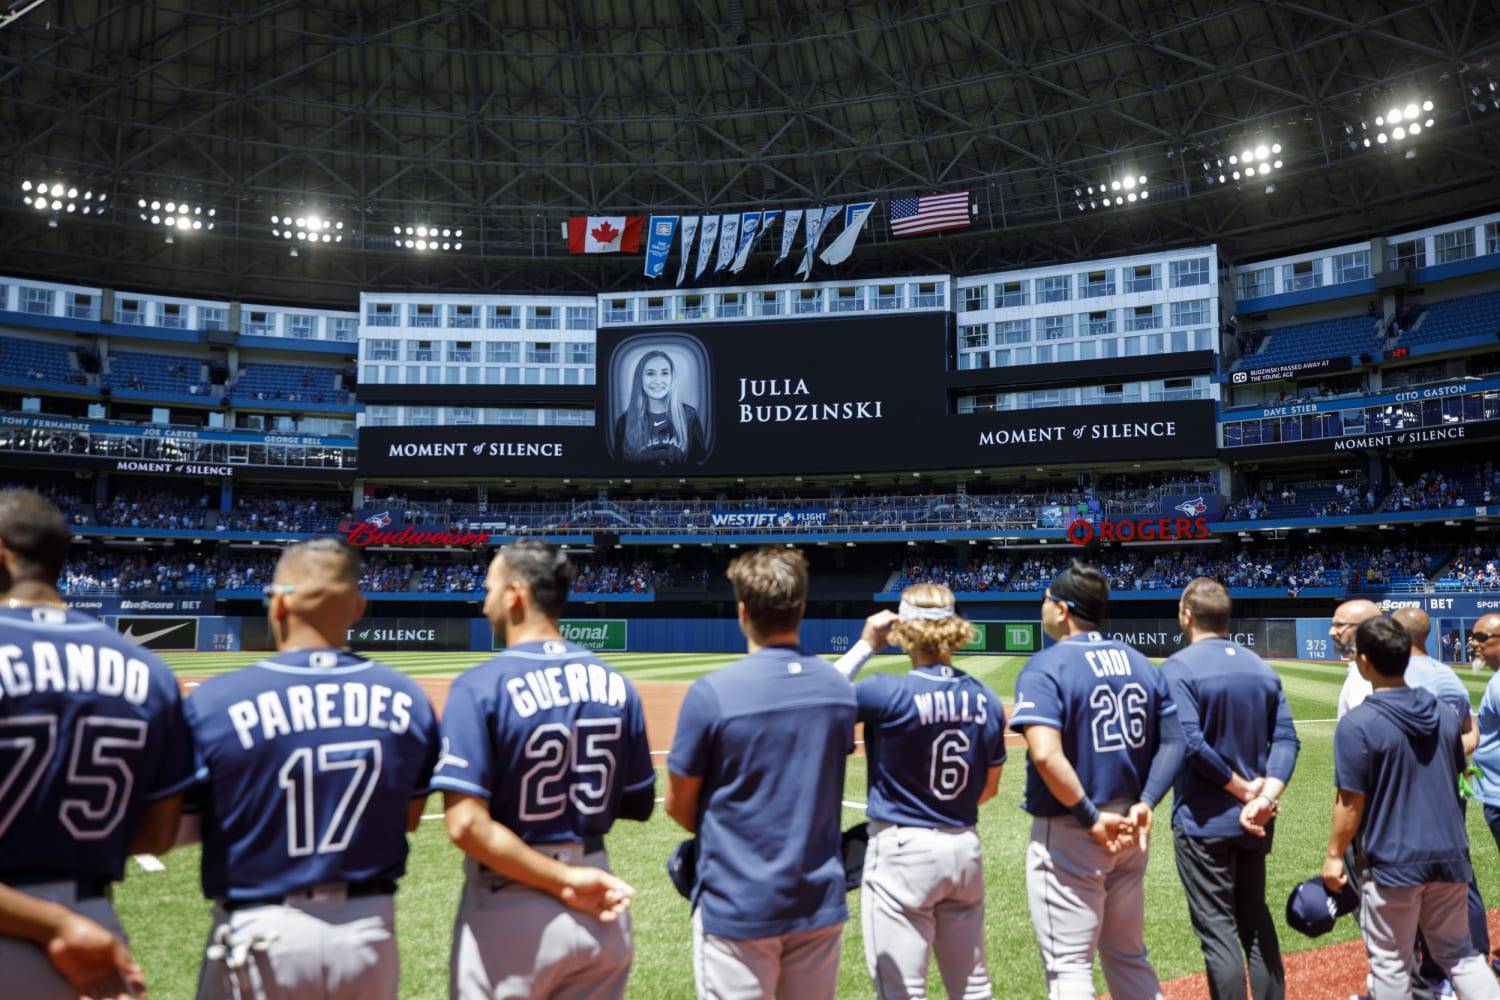 Teenage daughter of Toronto Blue Jays' first base coach dead in presumed boating accident